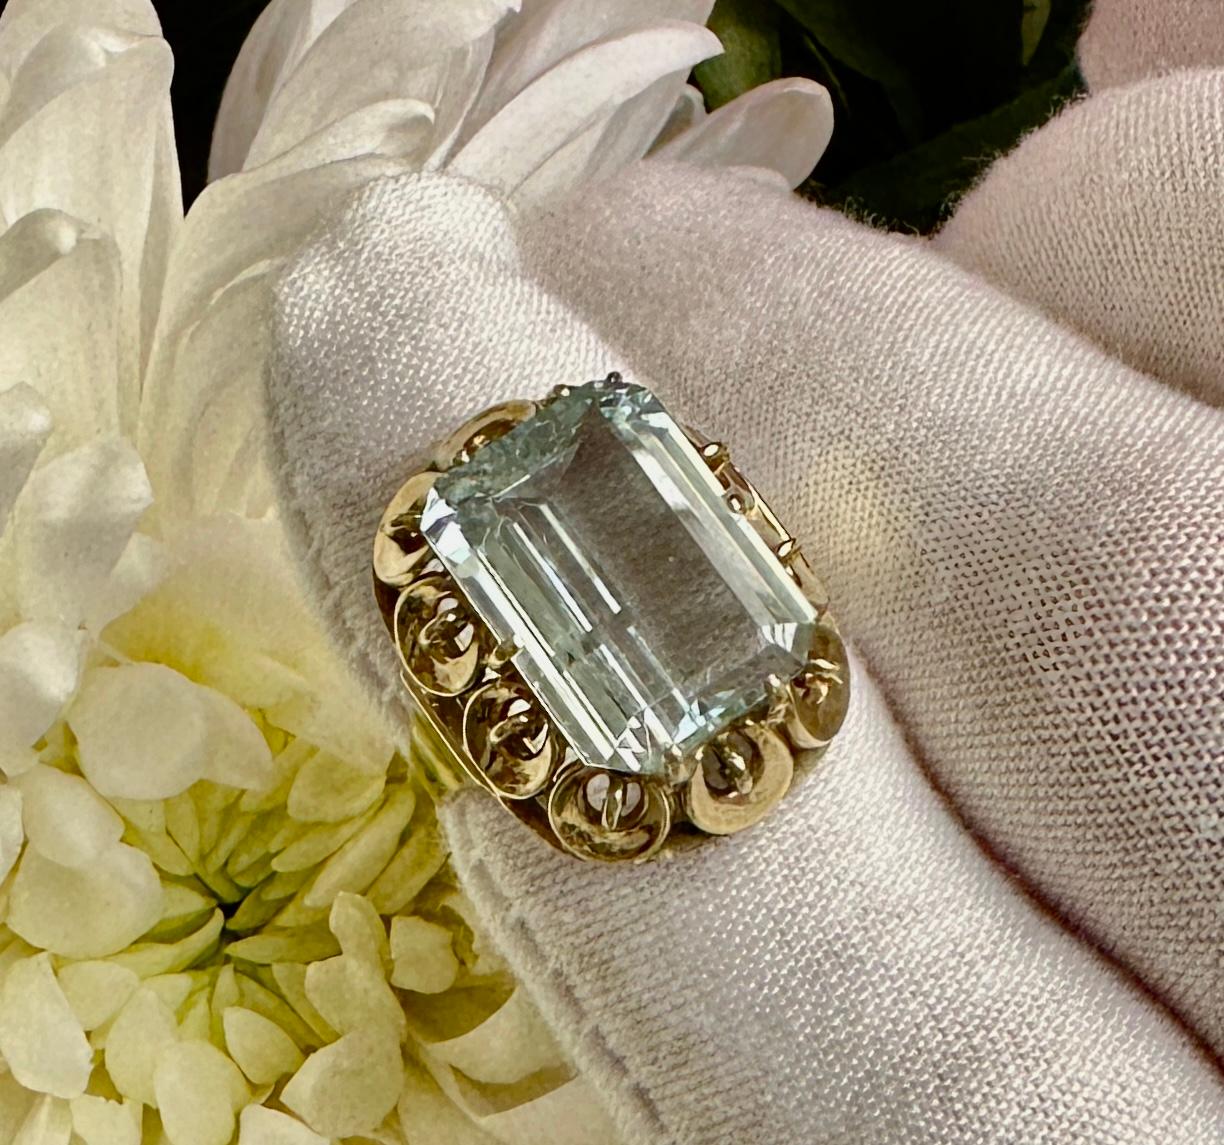 Retro 5.6 Carat Aquamarine Ring 14 Karat Gold Emerald Cut Antique Cocktail Ring In Excellent Condition For Sale In New York, NY